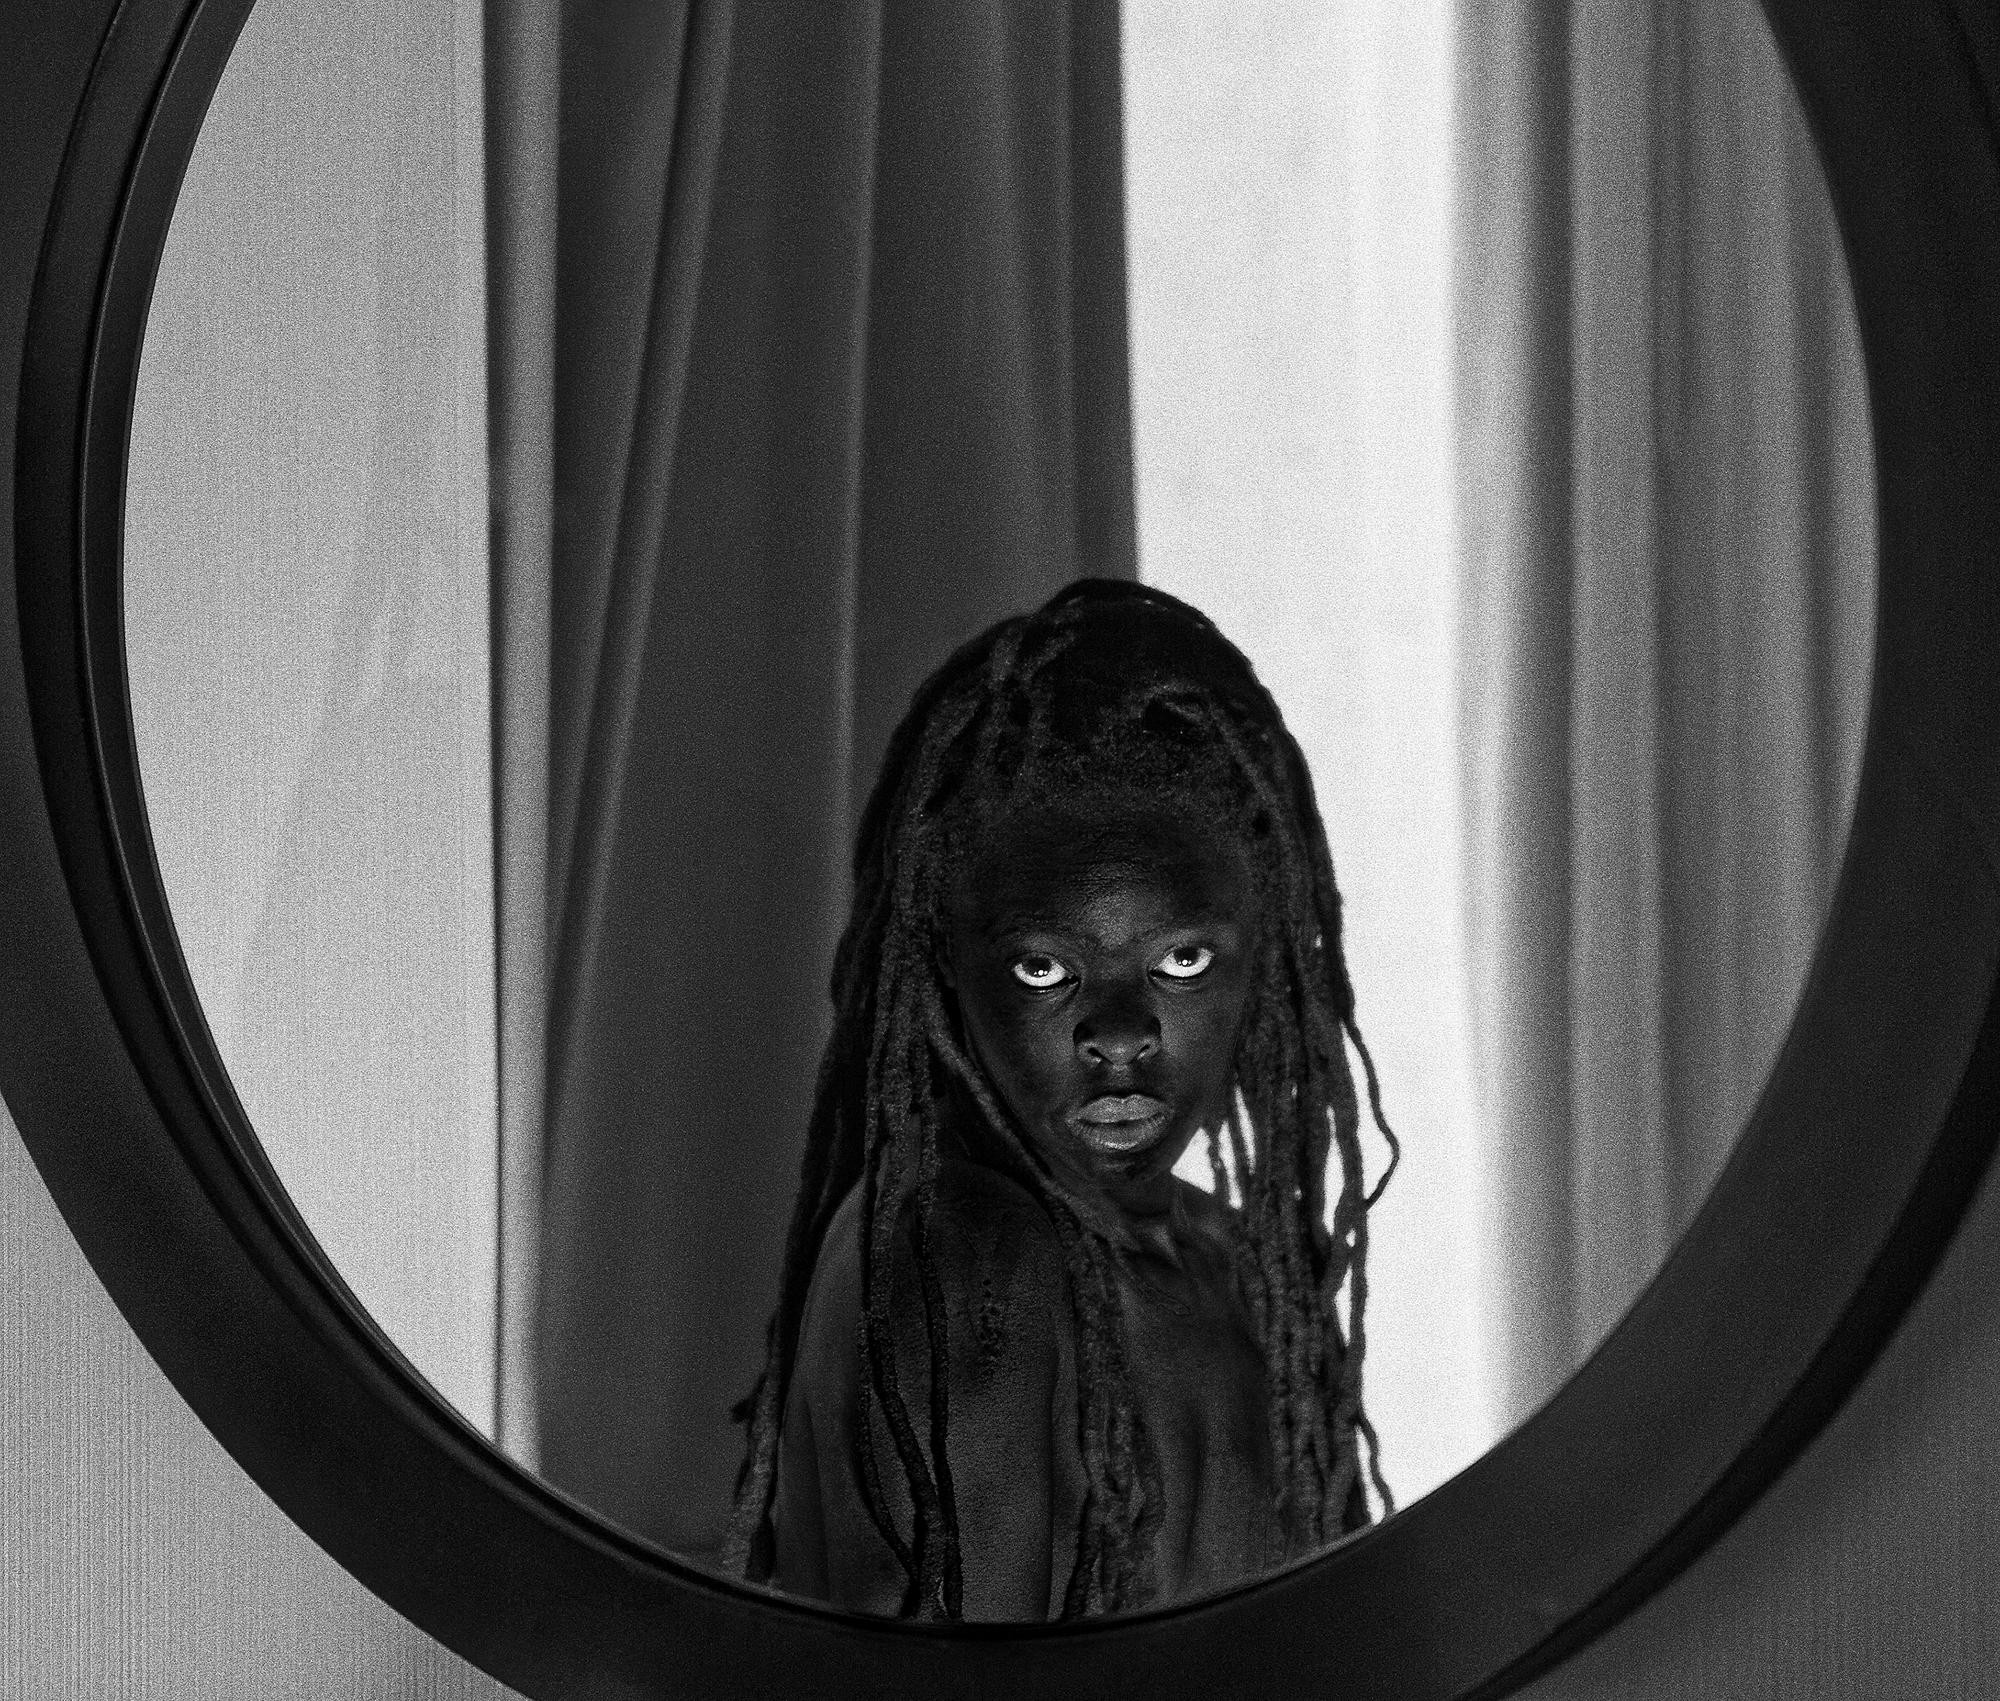 A black and white image of a person looking in a large mirror mounted on a wall.